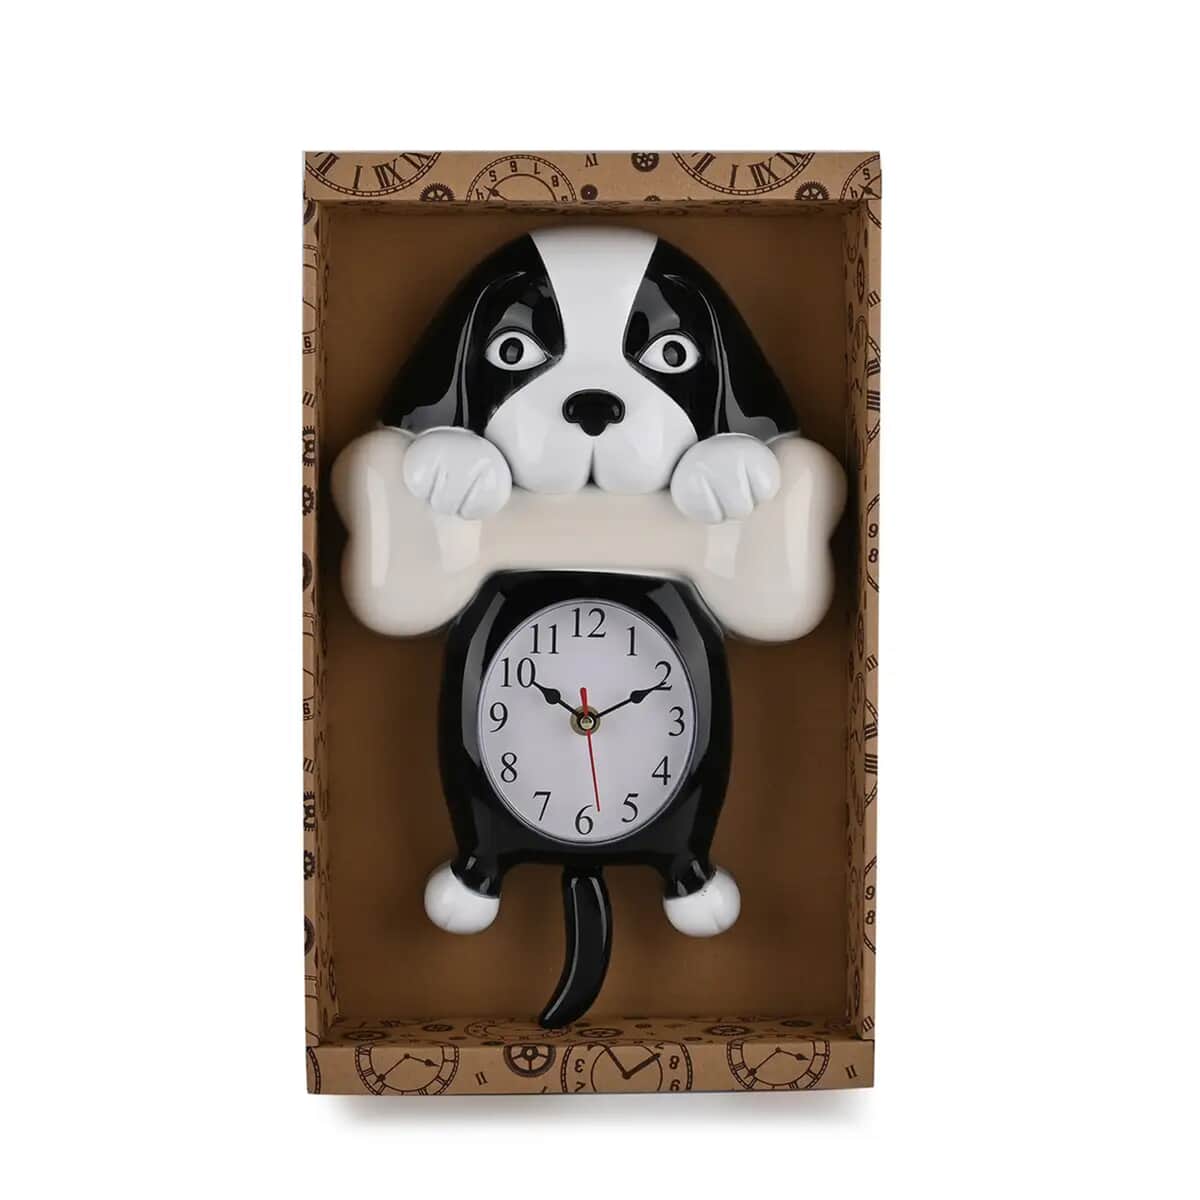 Black Dog Shaped Wall Clock with Moving Tail (14.17"x9.37"x2.51") (1xAA Battery Not Included) image number 6